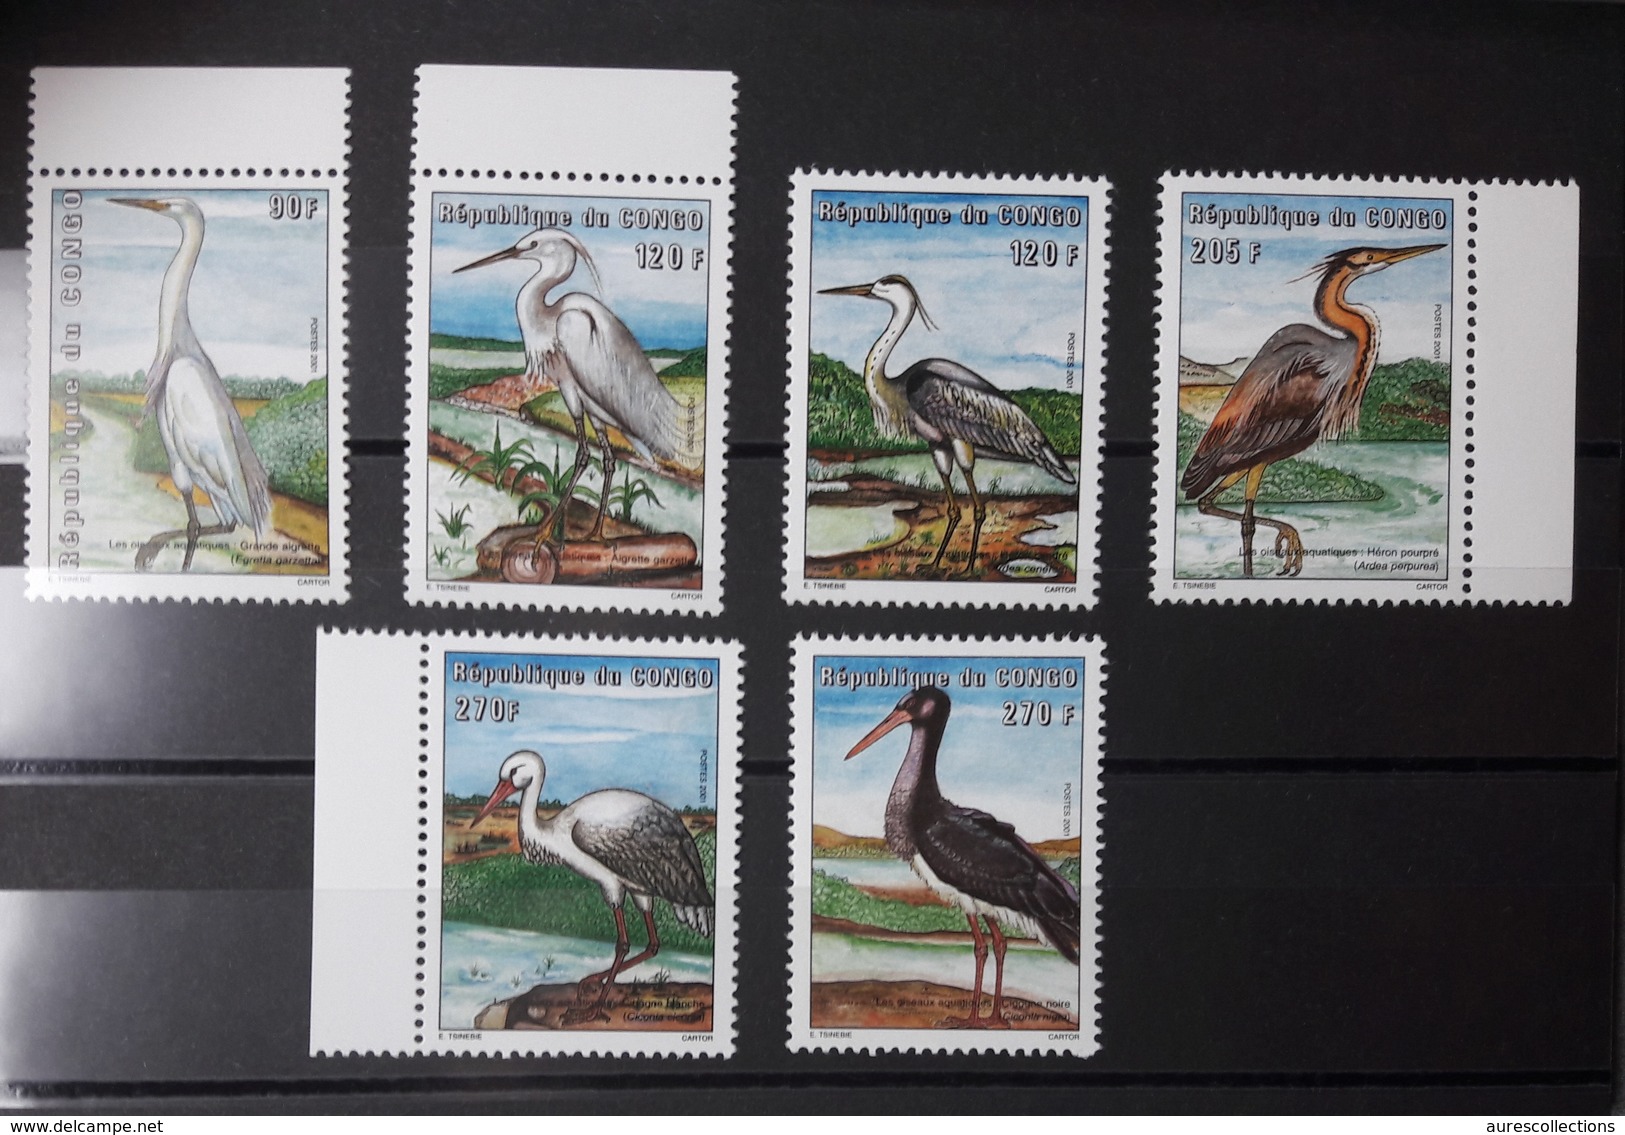 CONGO 2001 YT 1081A/F 1081A  1081 A B C D E F - OISEAUX - BIRDS - VÖGEL SERIE COMPLETE -  FULL SET - EXTREMLY RARE ! ! ! - Mint/hinged